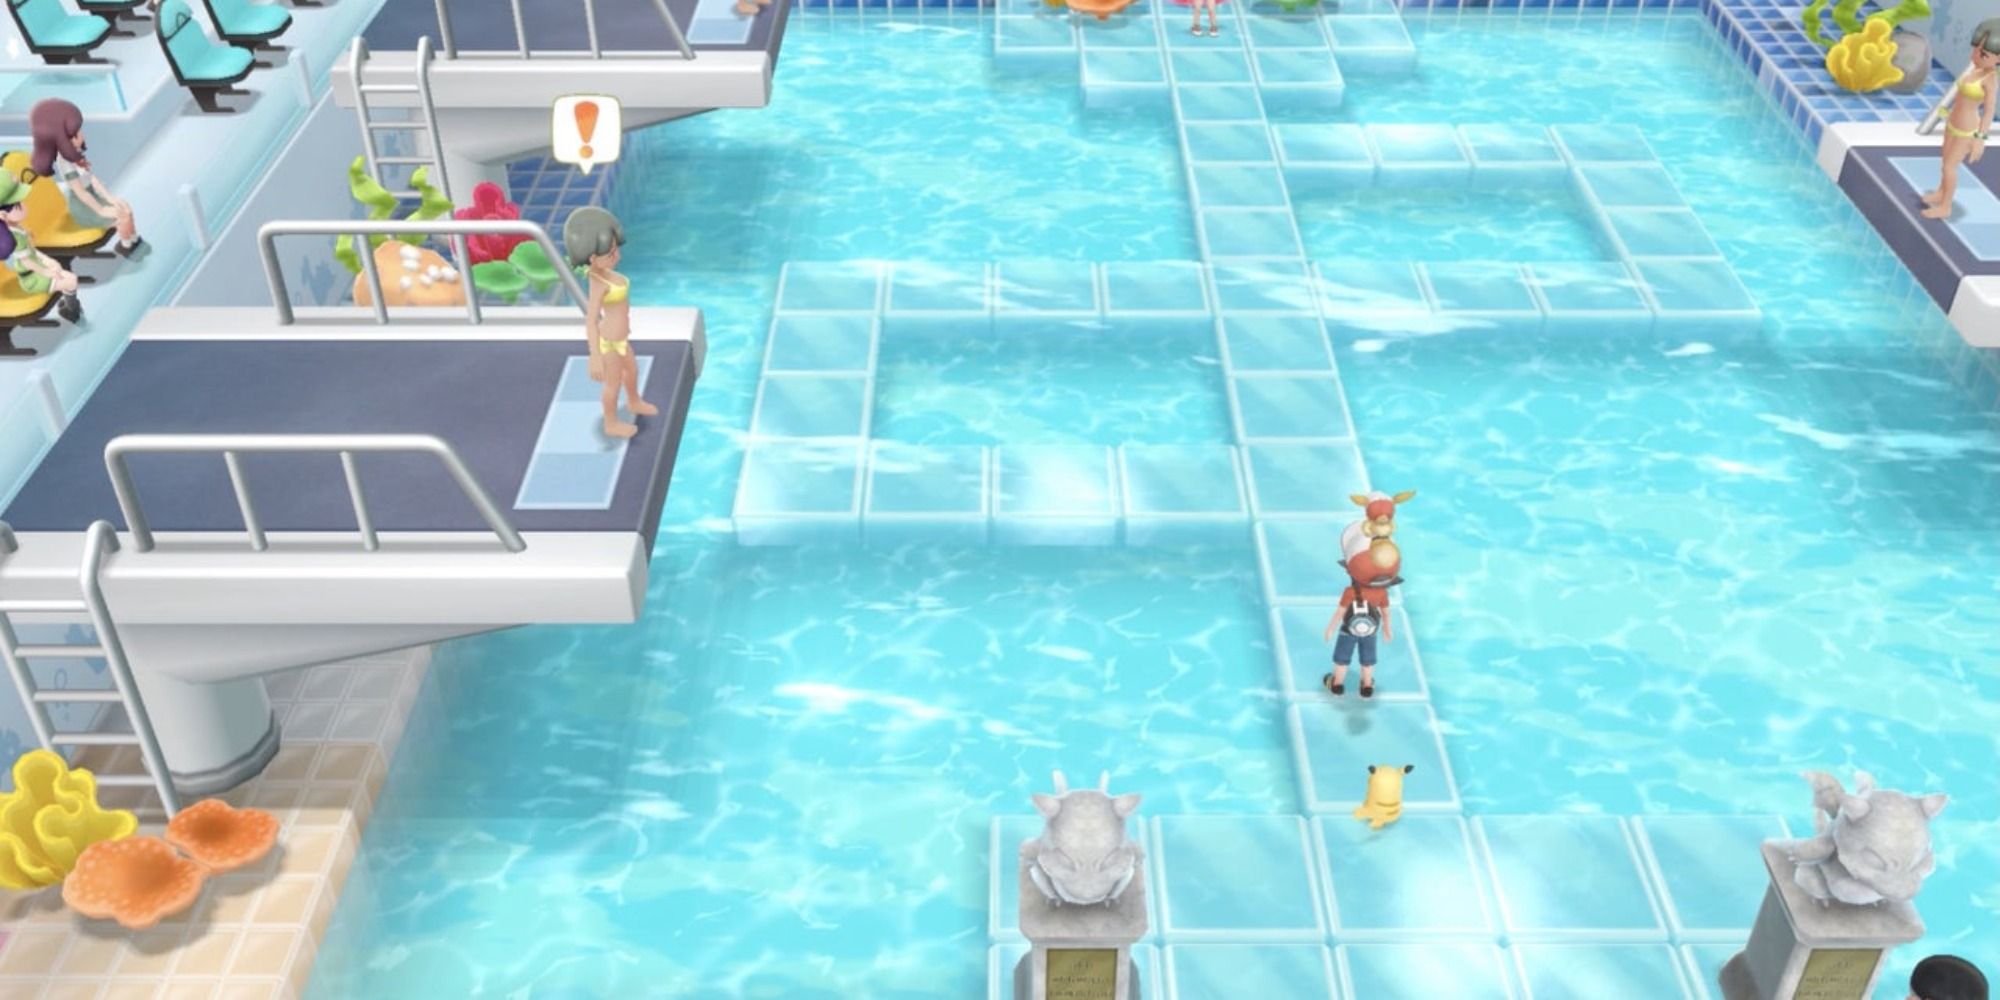 Pokemon Iconic Locations Cerulean City water gym